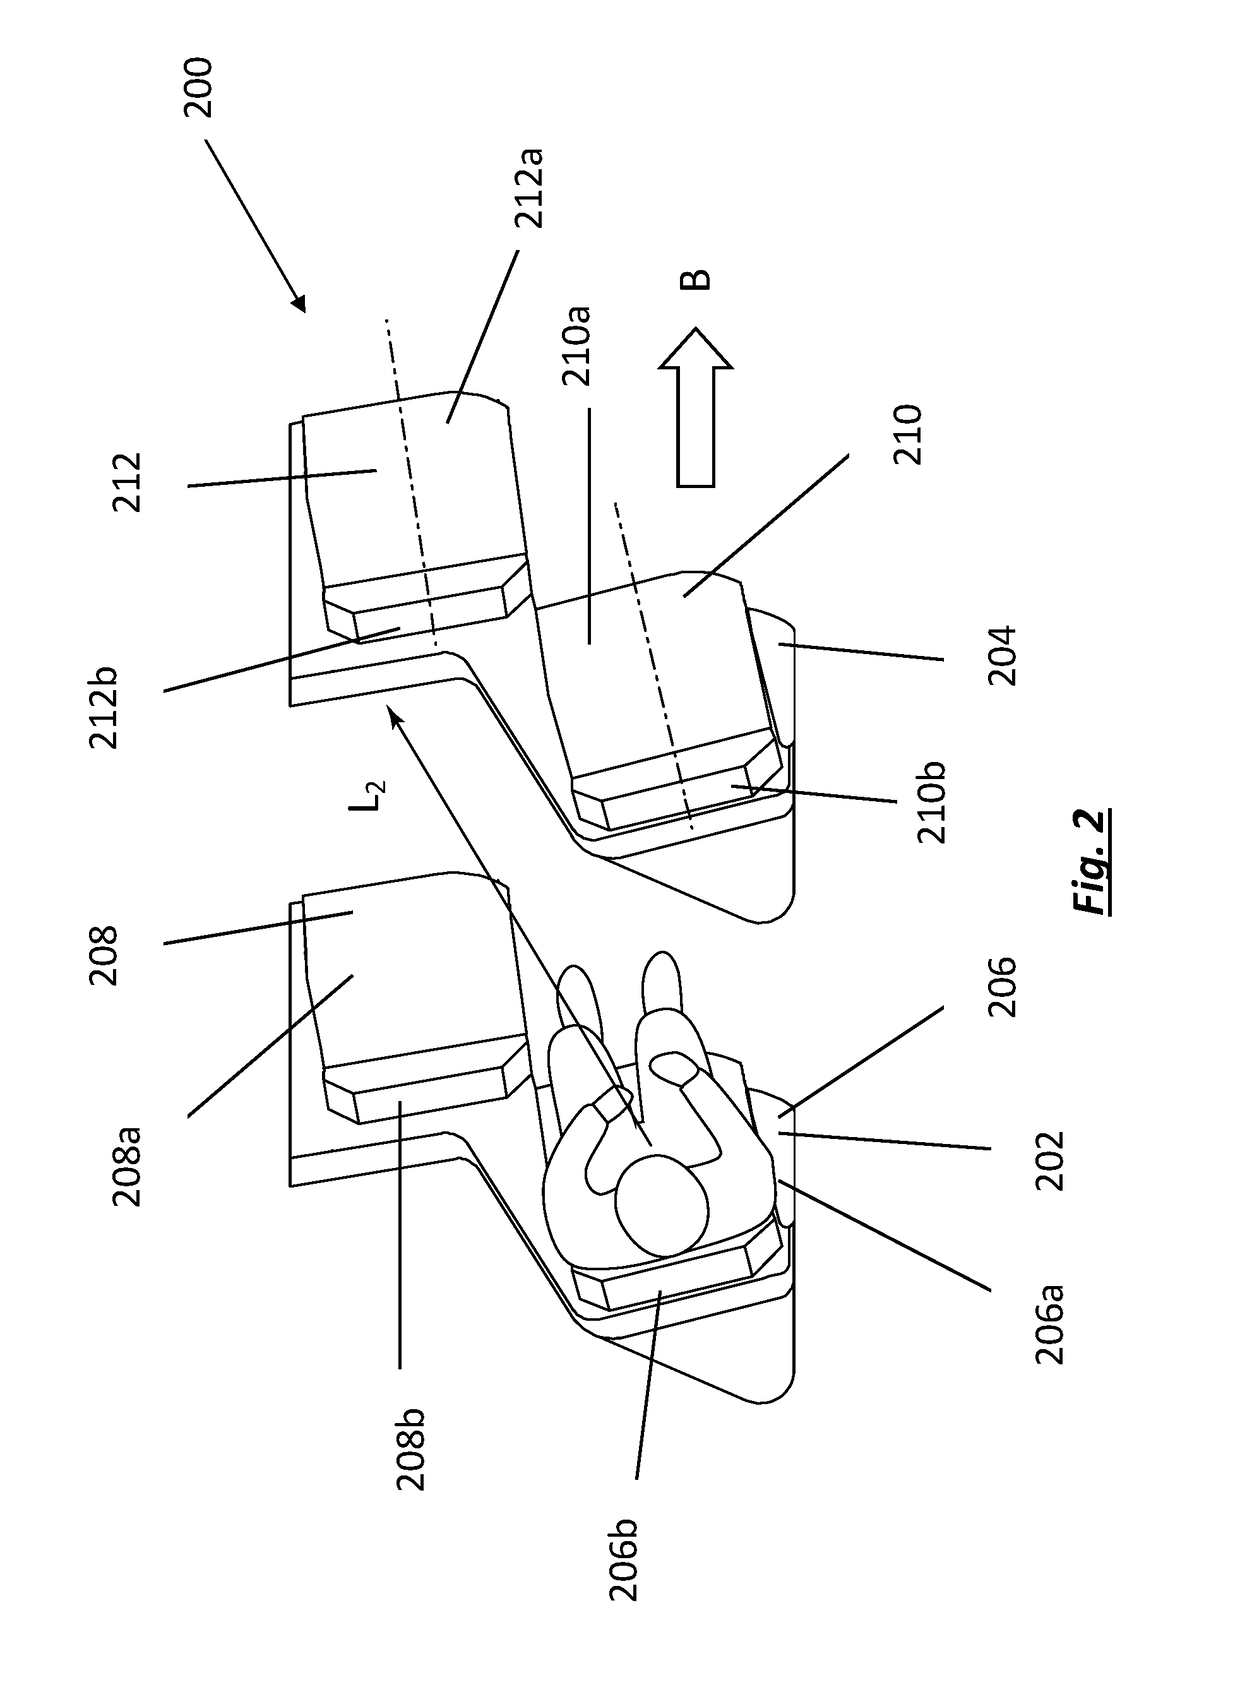 Convertible seating unit and seating arrangement